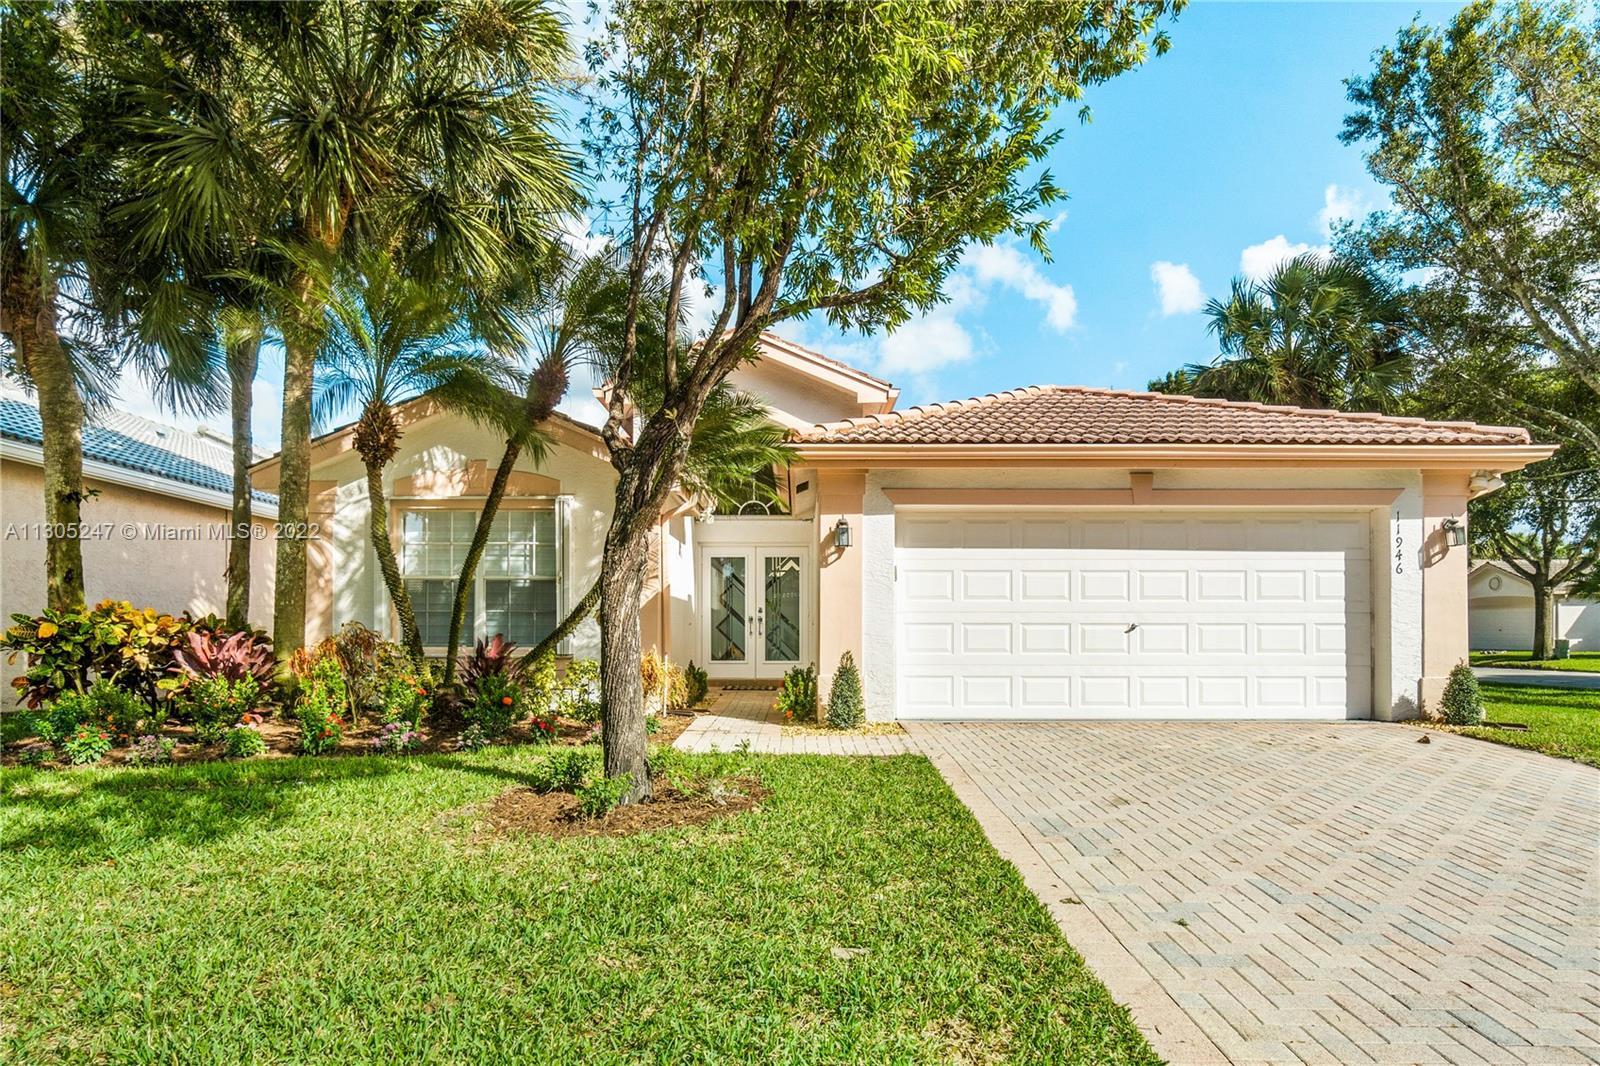 Located on a charming street inside the inviting Gated Community of Valencia Lakes, this beautifully